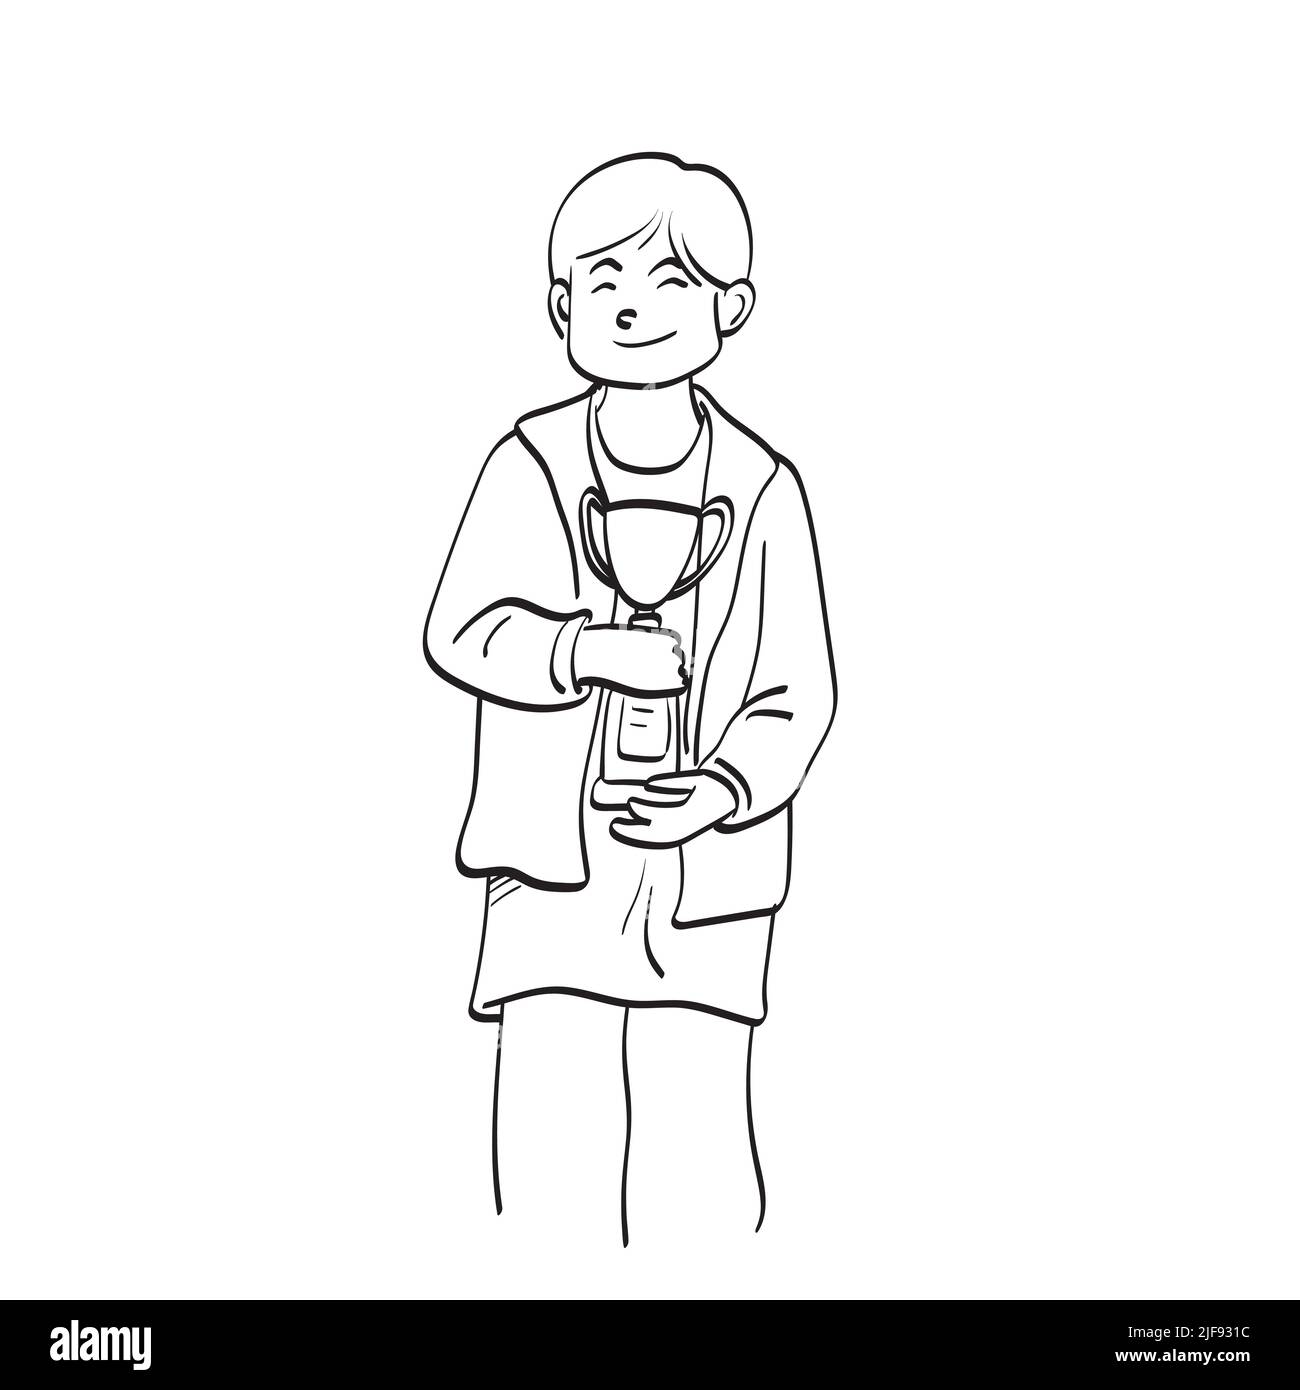 line art smiling boy holding trophy on his chest illustration vector hand drawn isolated on white background Stock Vector